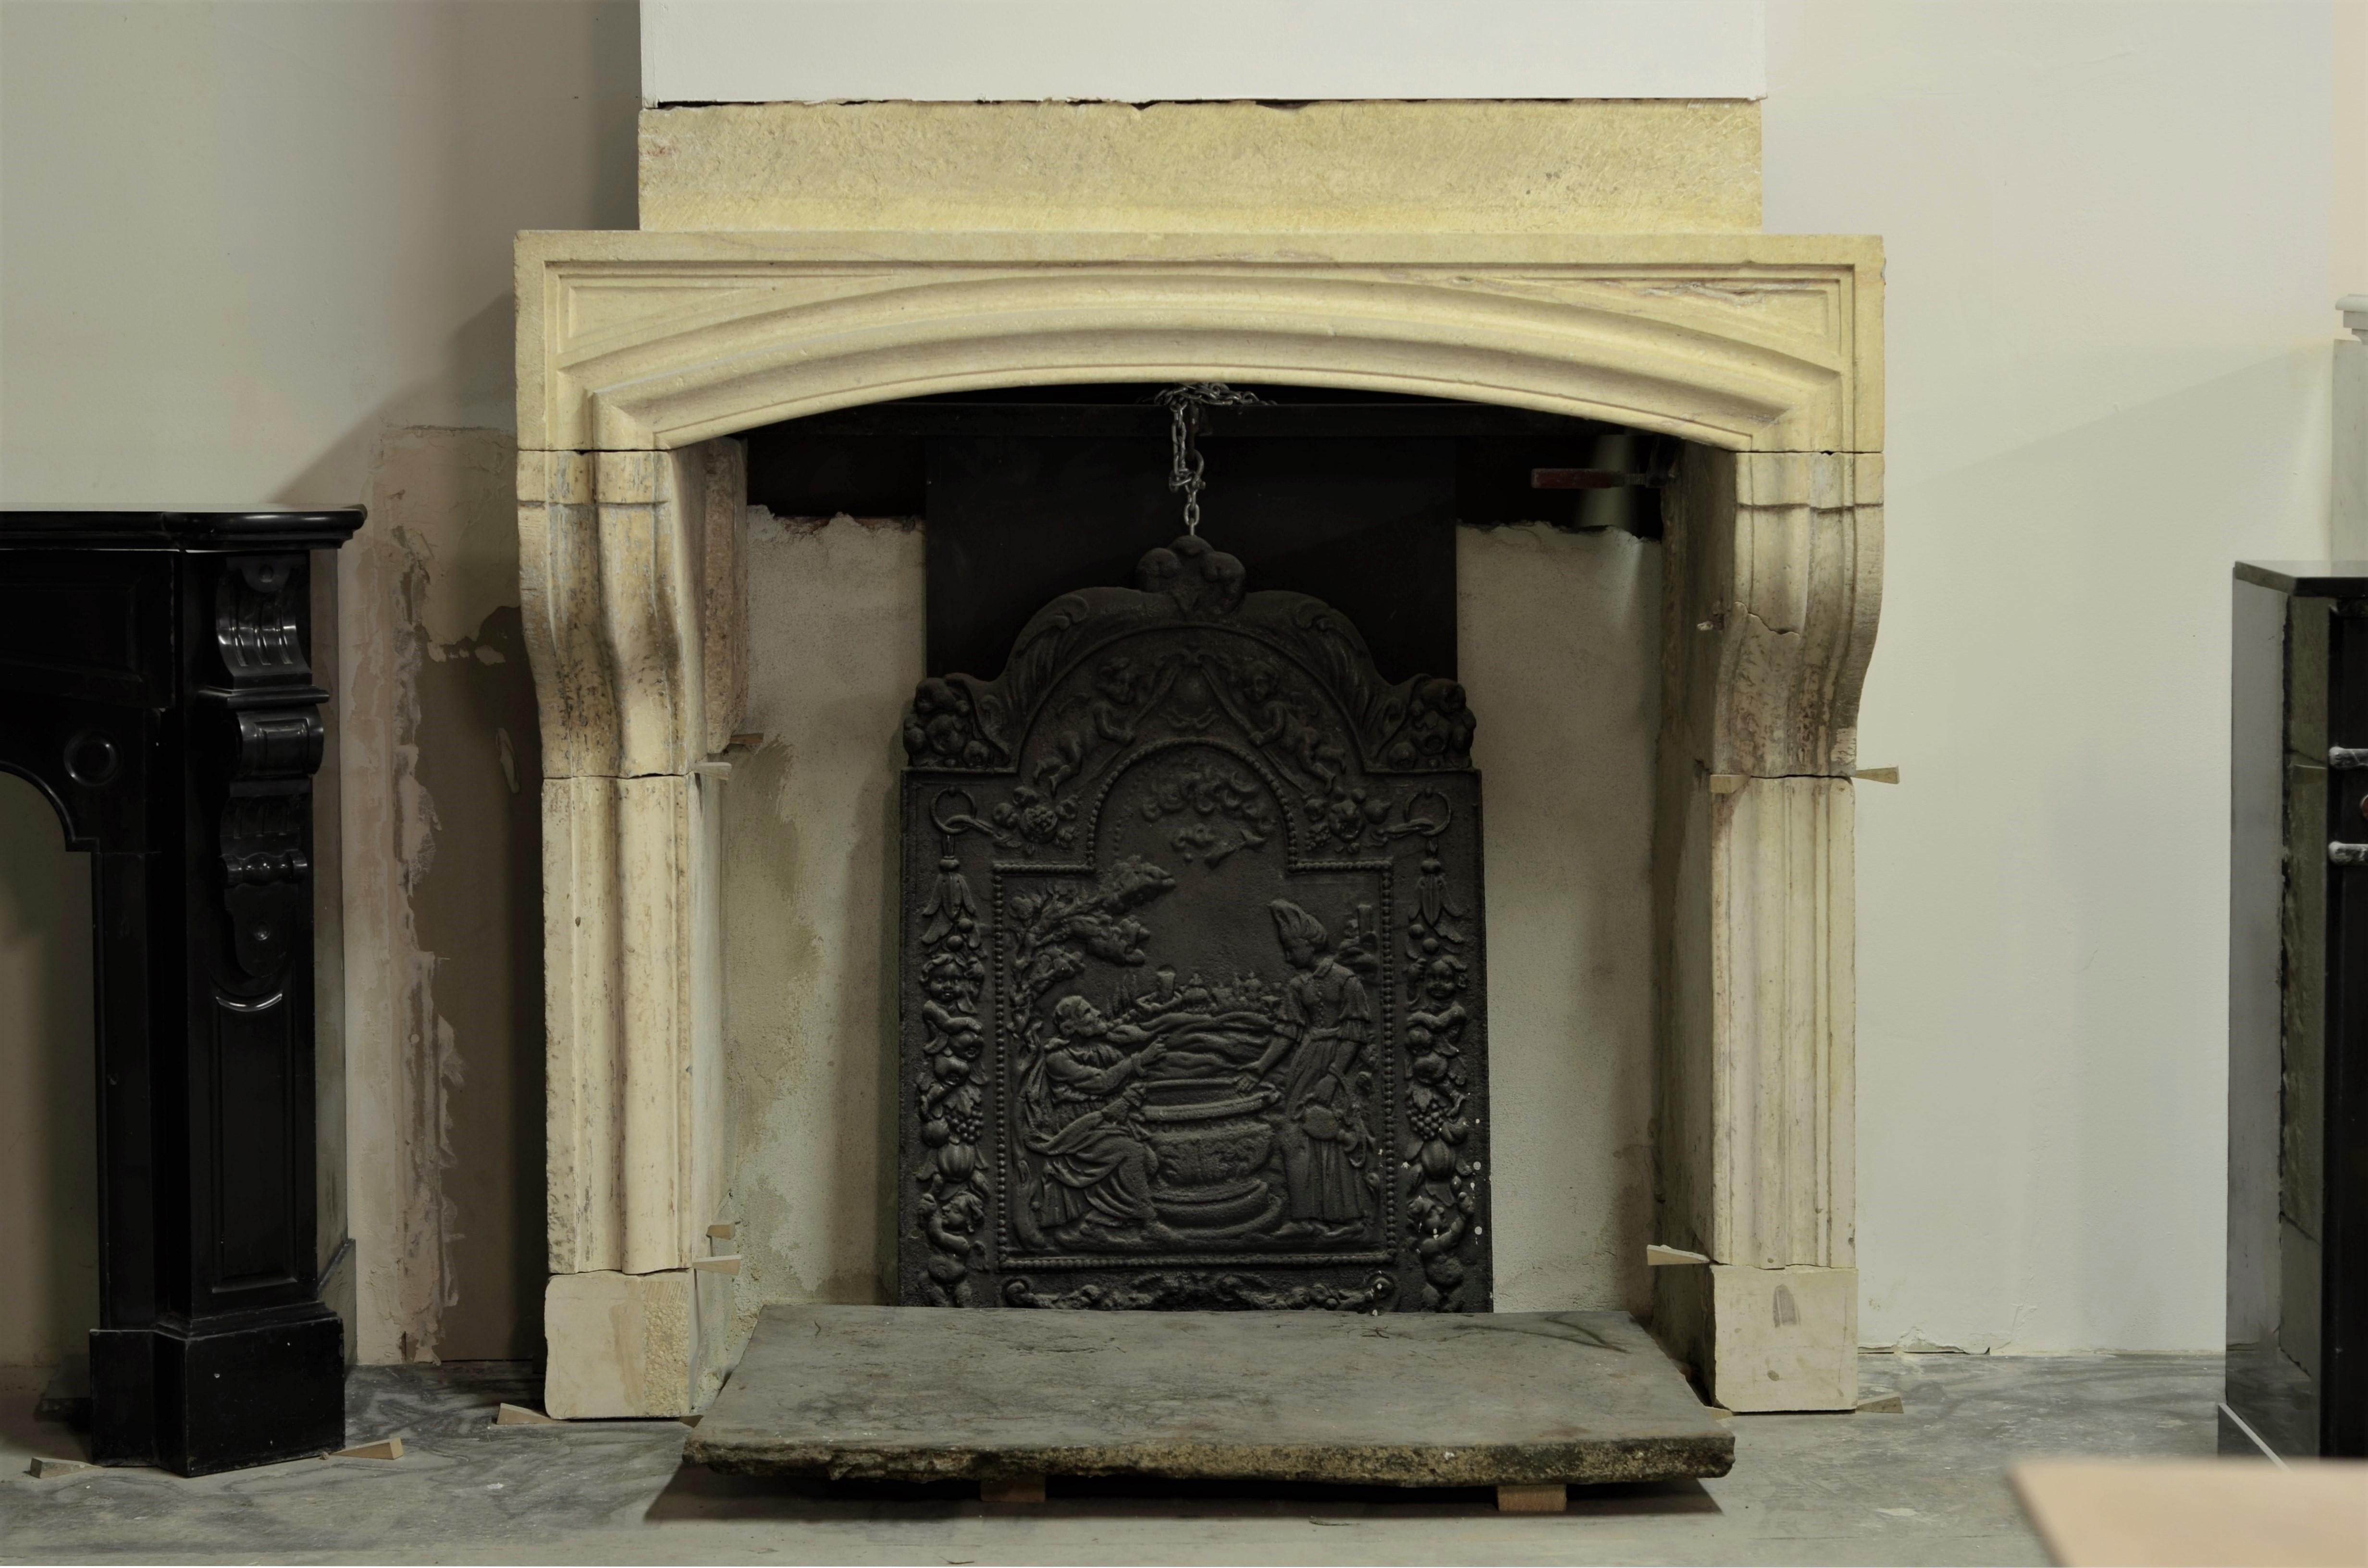 A nice and tall profiled French Louis XIV fireplace mantel in soft-toned limestone.
This early 19th century rustic mantel has a nice overhang, strong profiles and an exceptional frieze.
The frieze and start of the overmantel are made from one